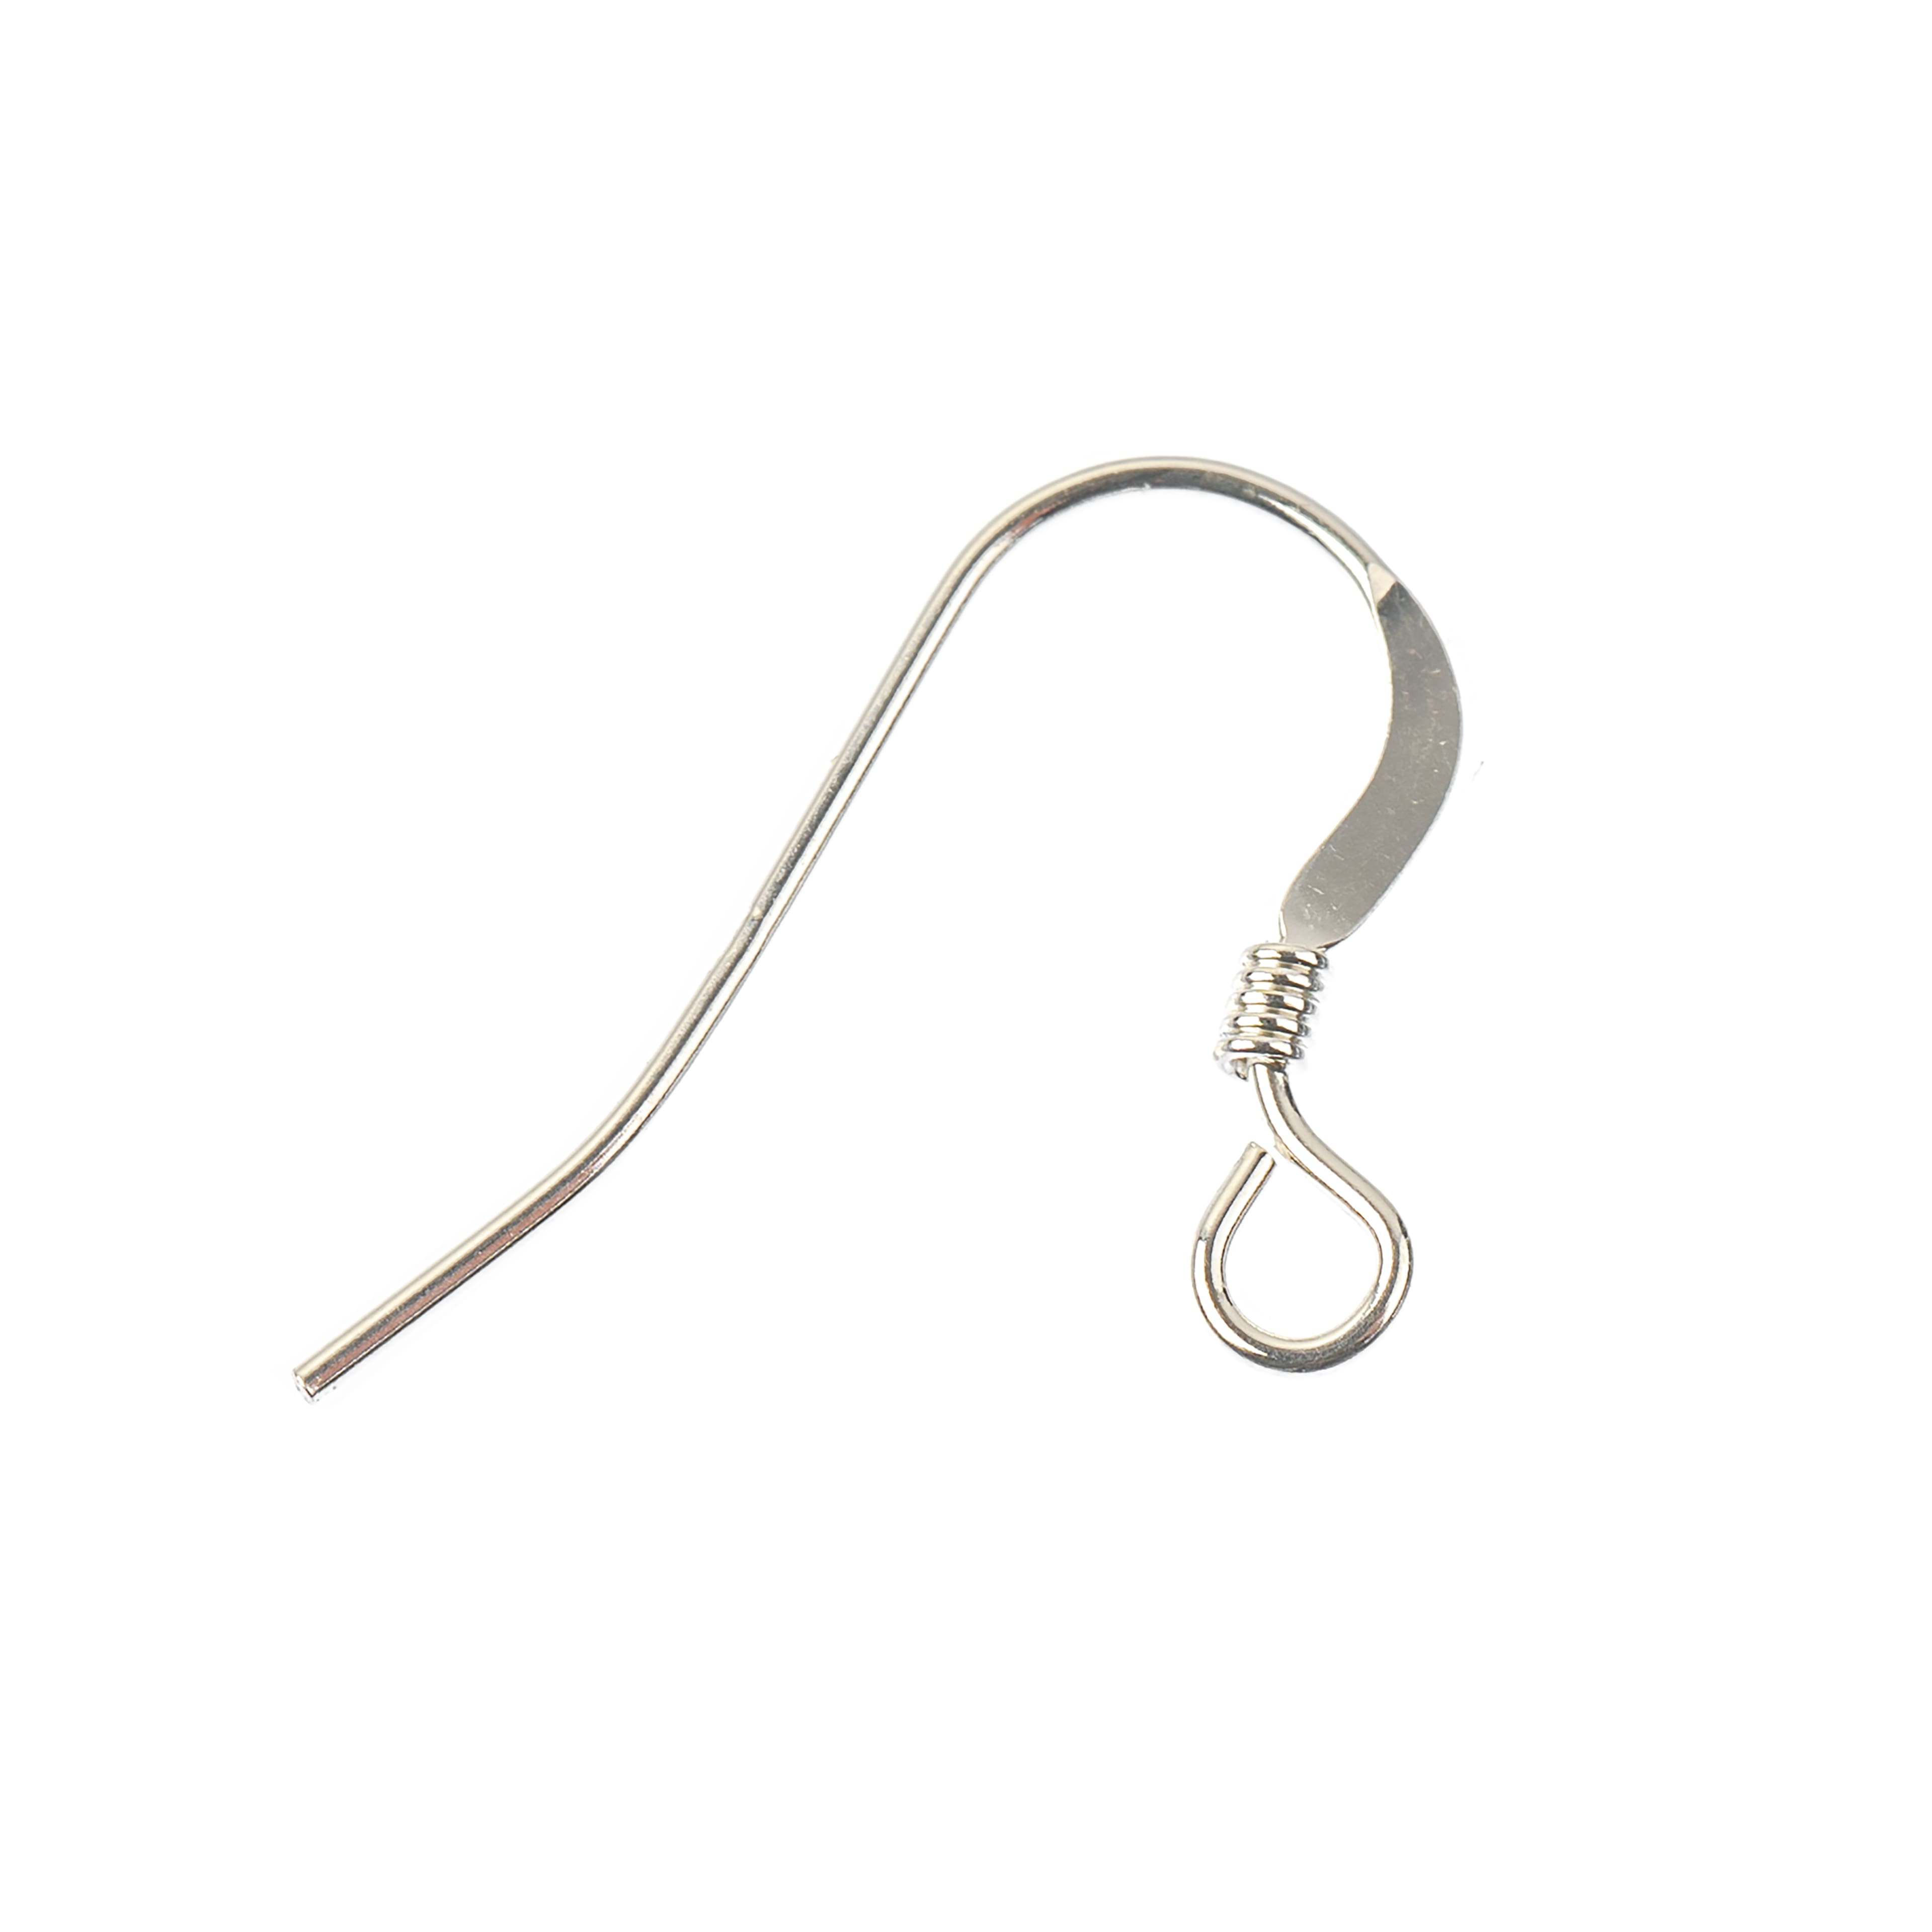 BULK PACK! Fish Hook Earwire w/ Spring & Bead, Silver-Plated